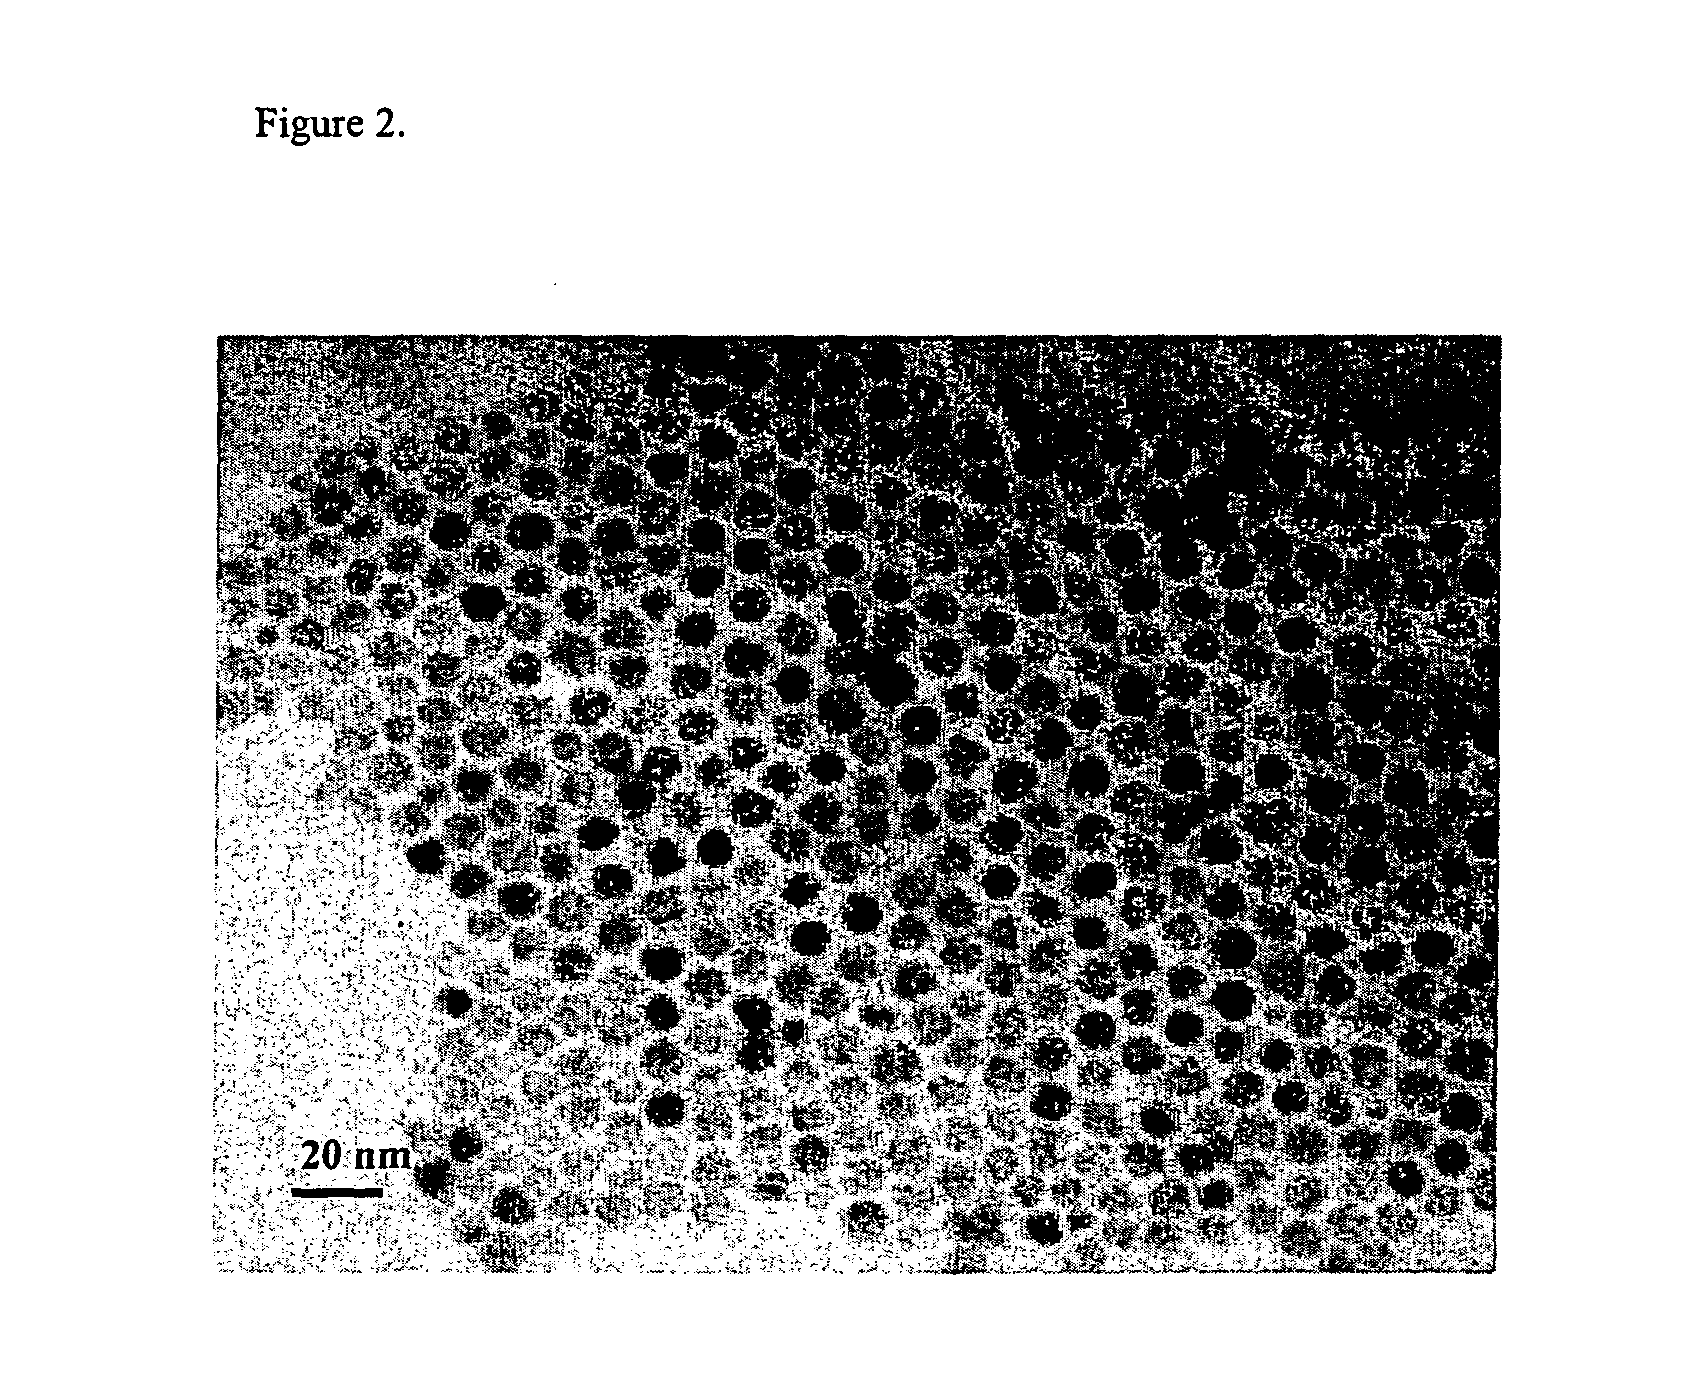 Method for synthesizing nanoparticles of metal sulfides